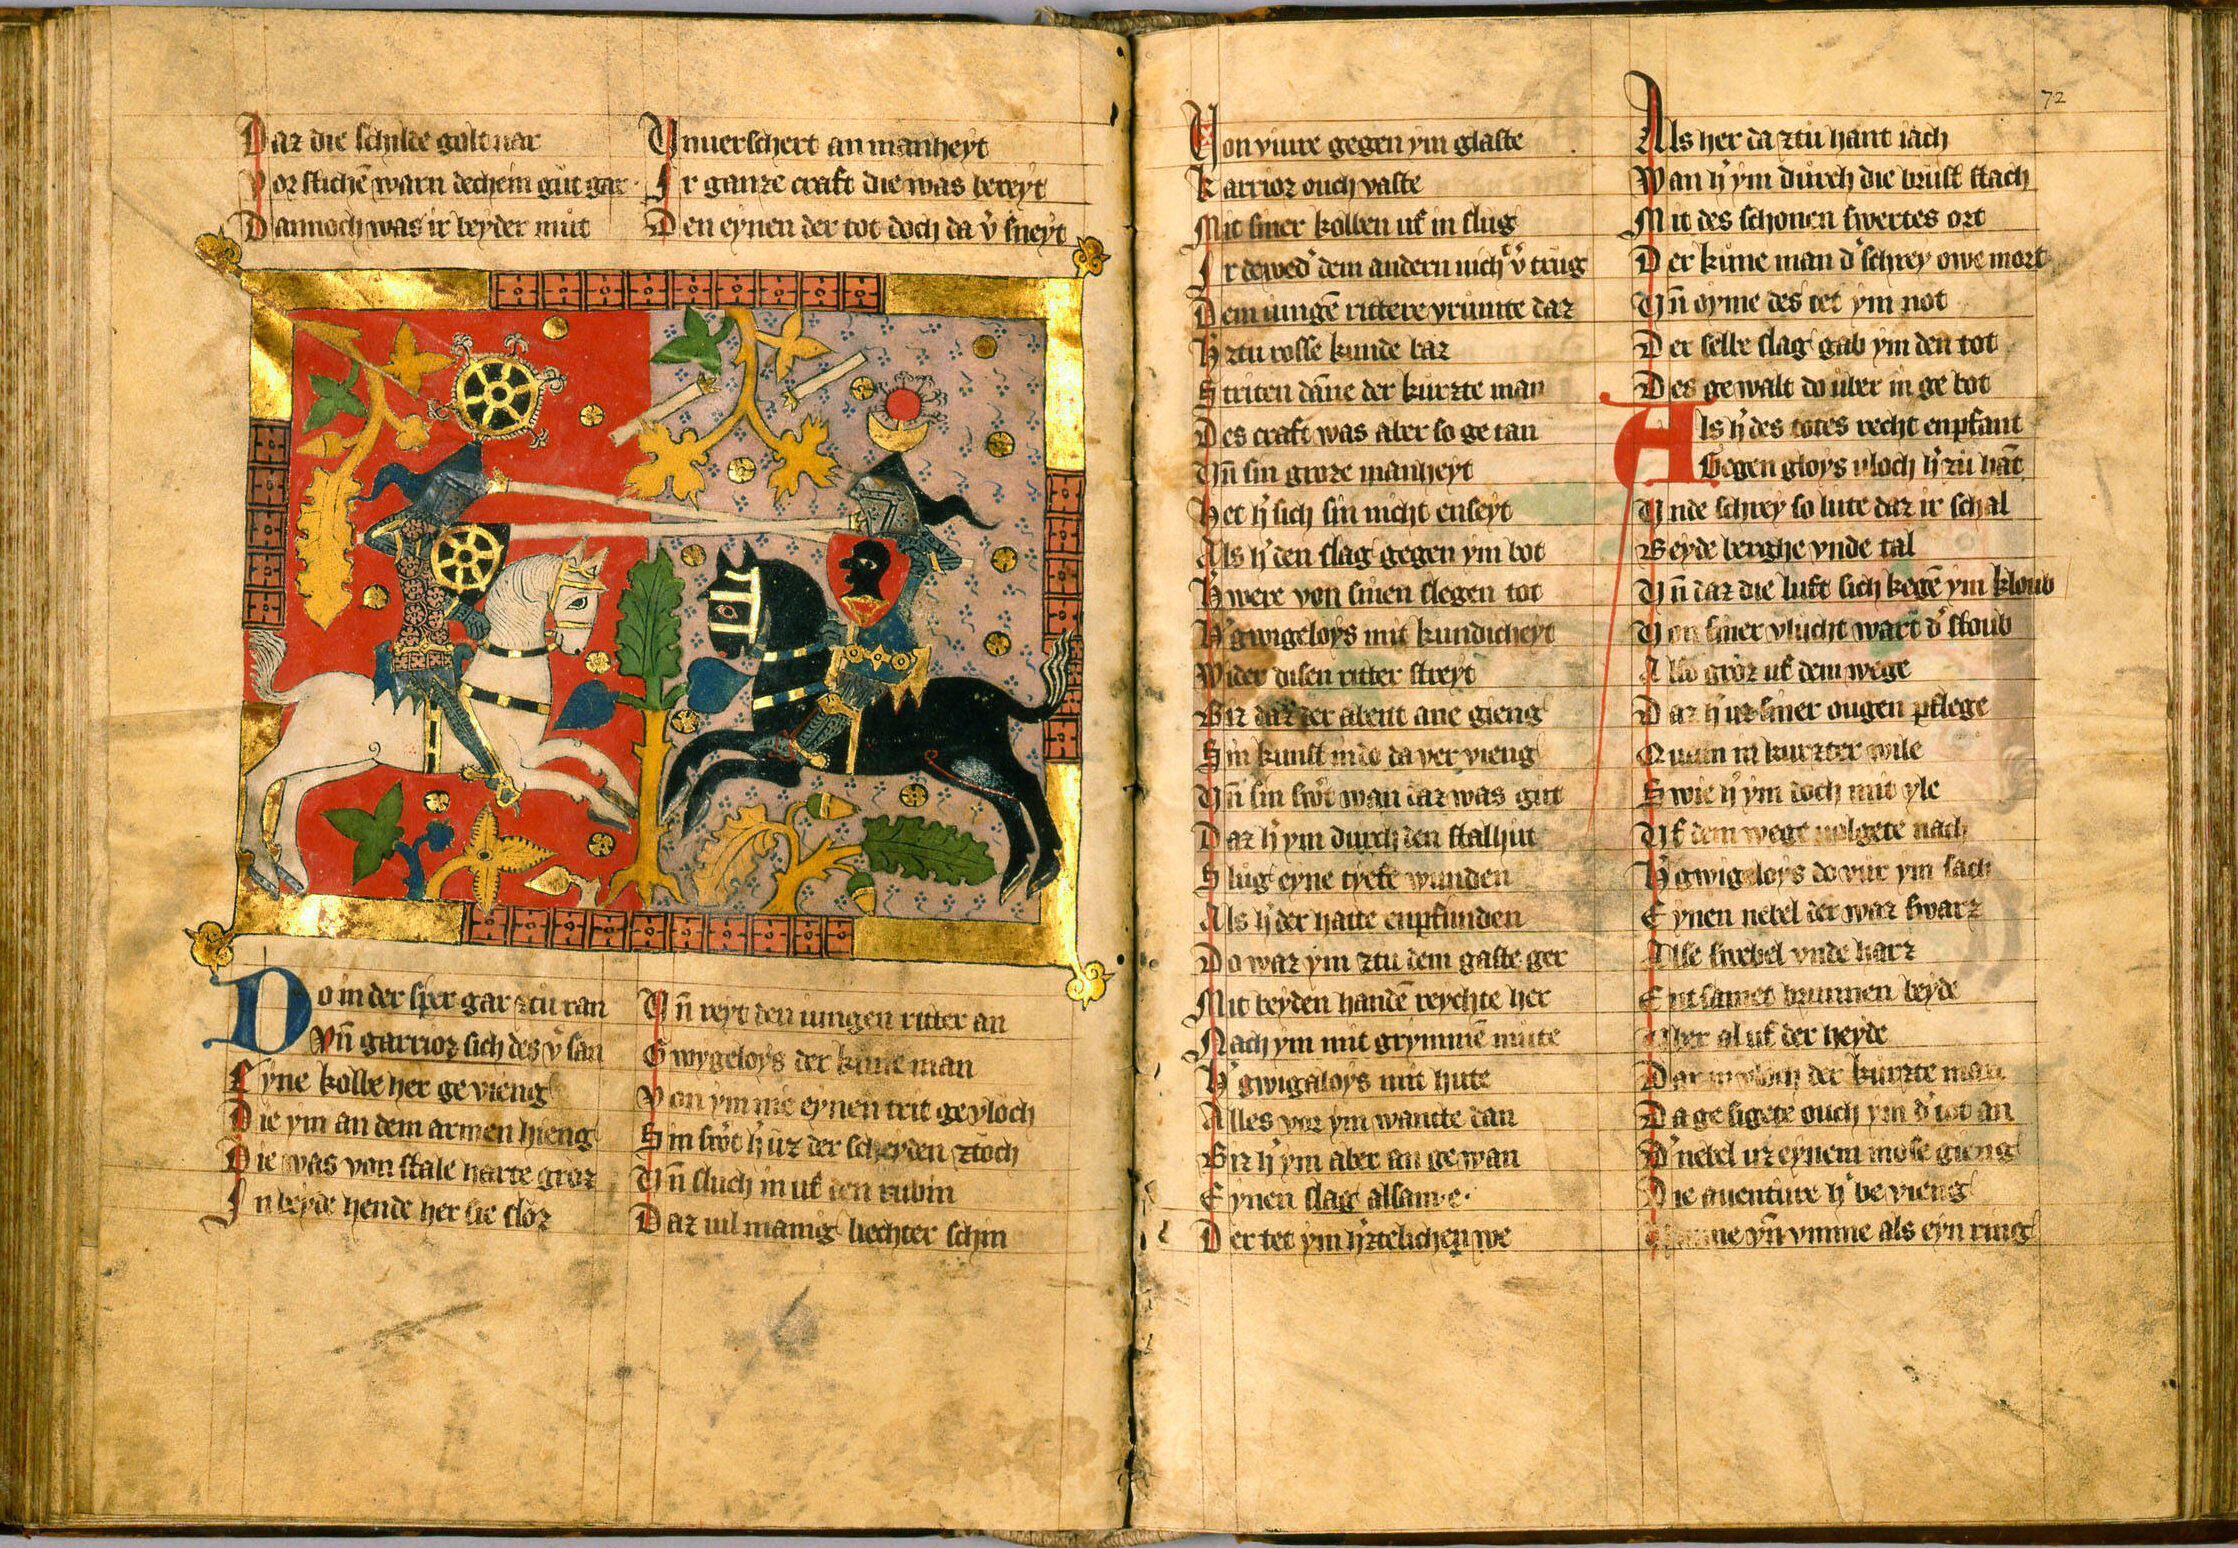 More than 90% of medieval literature manuscripts have been lost, researchers suggest